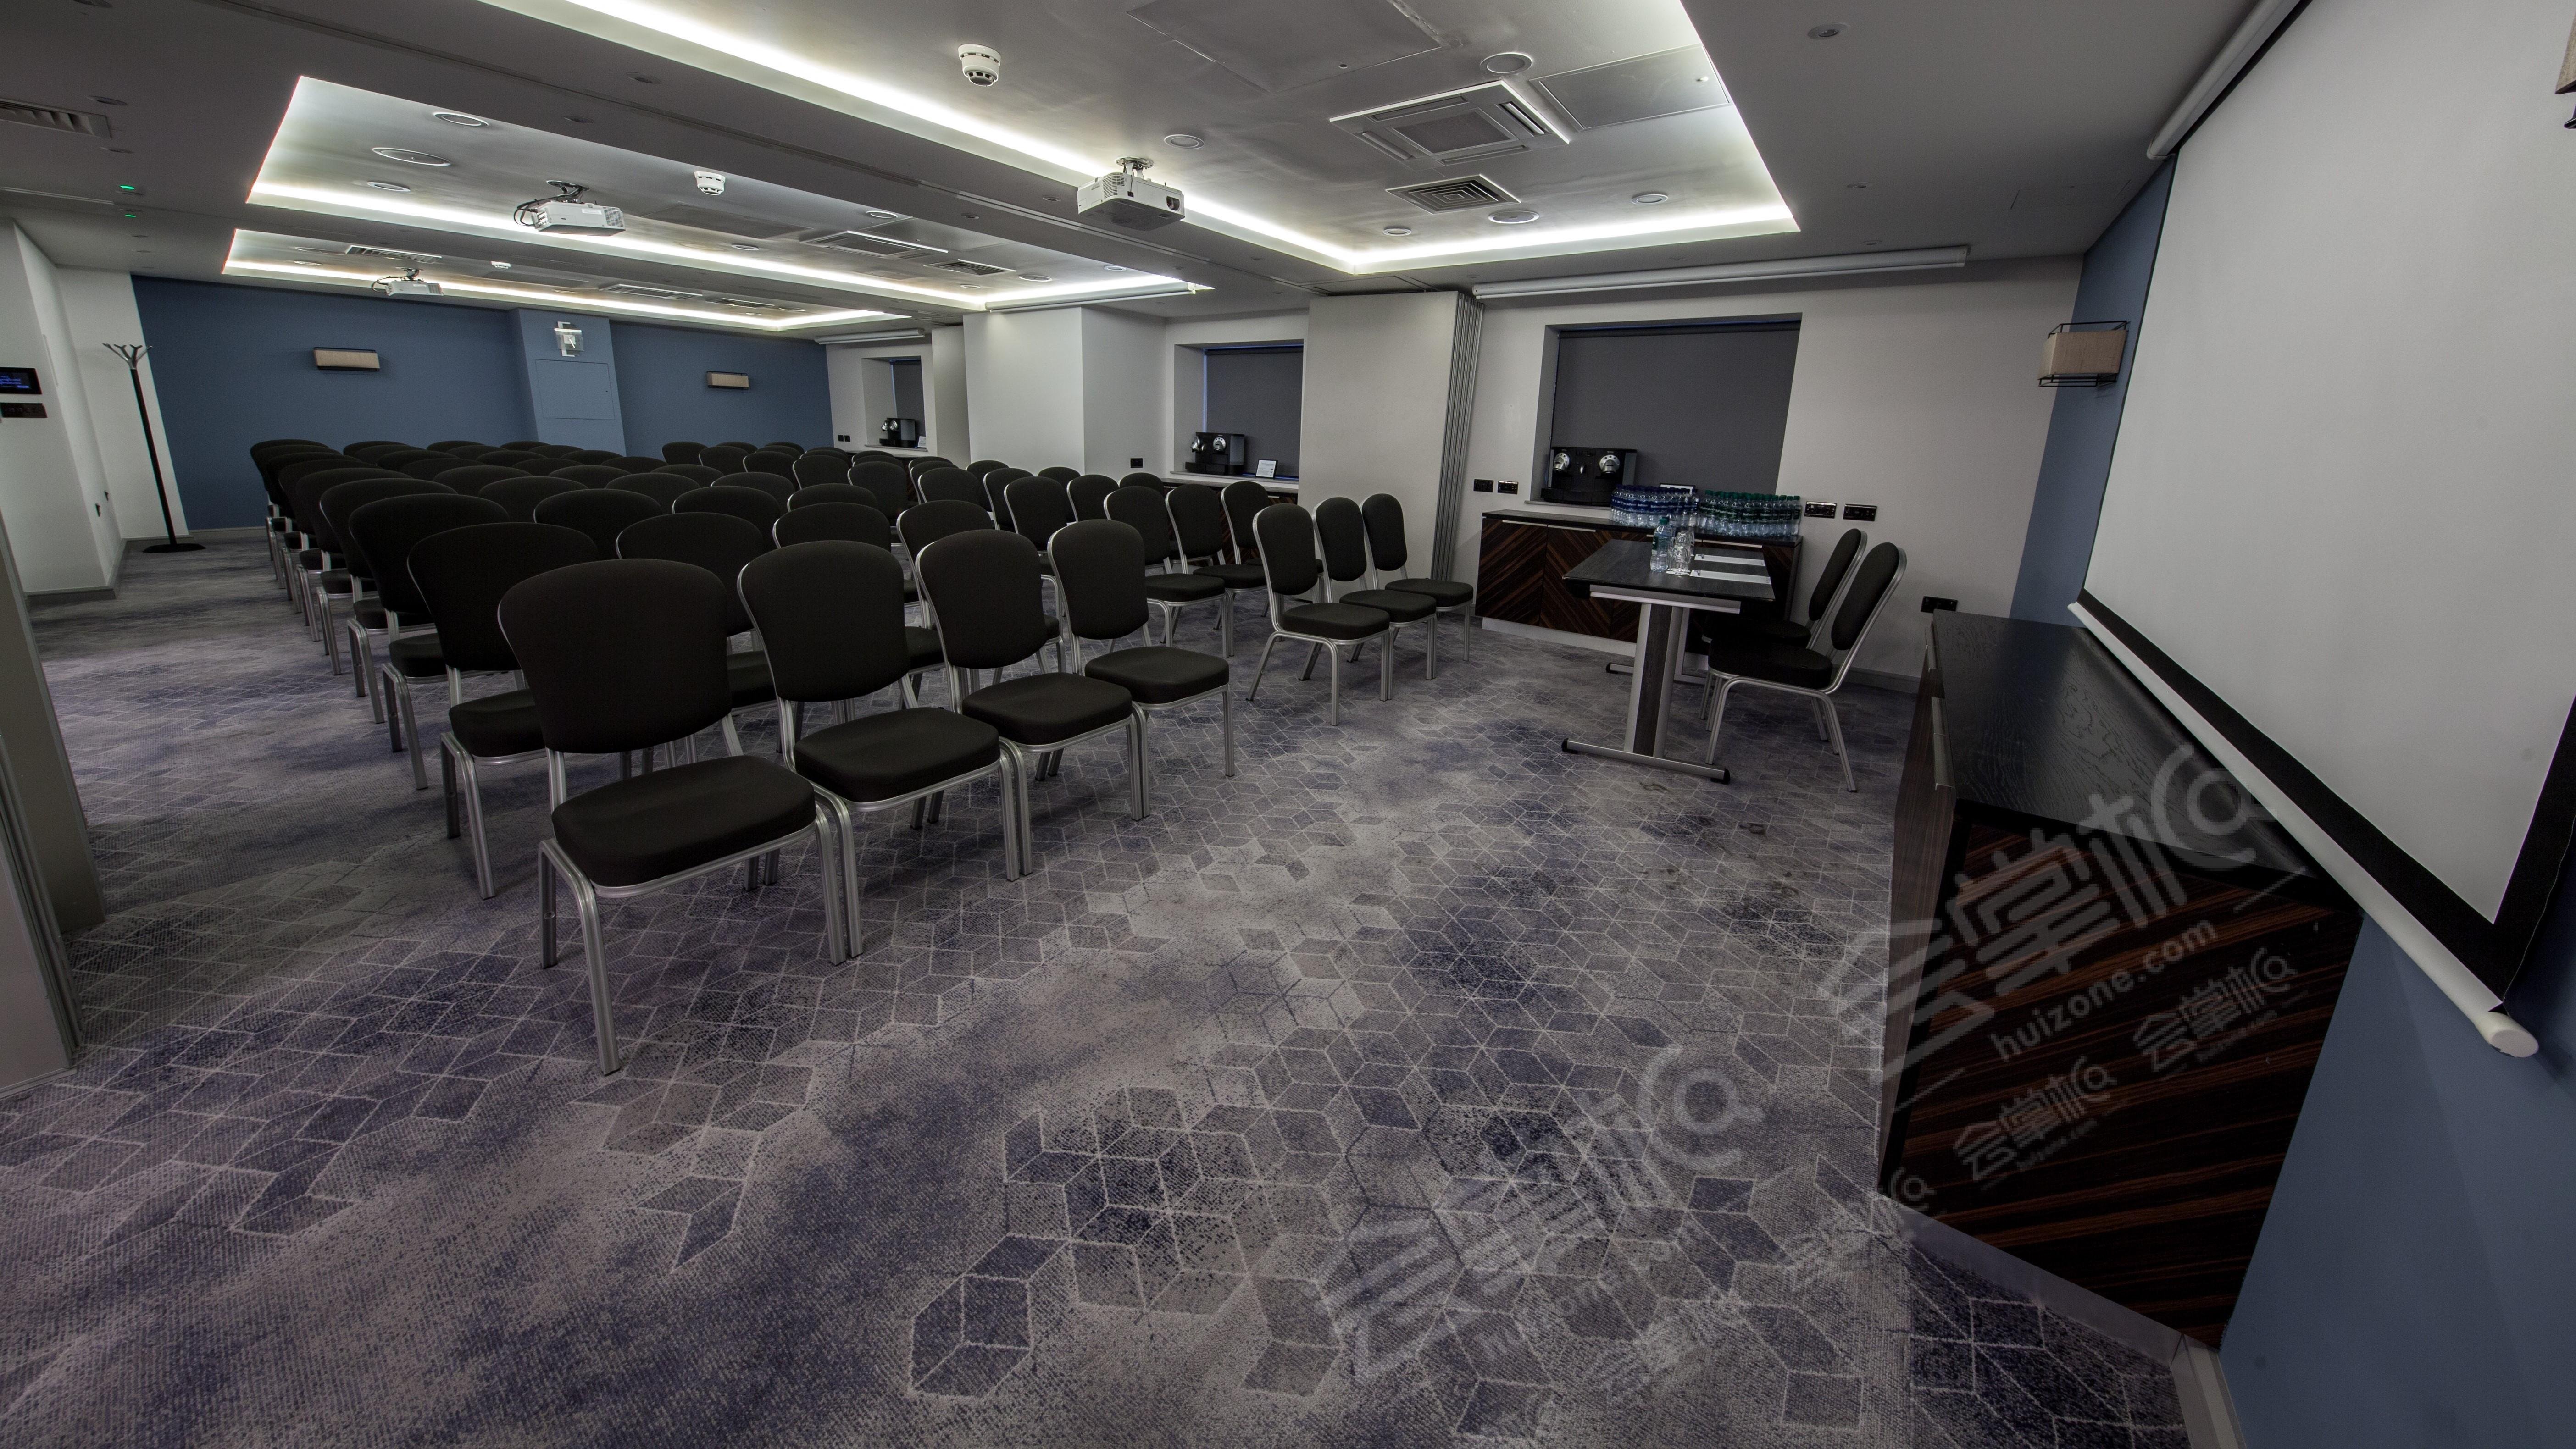 The Birmingham Conference and Events Centre at the Holiday Inn Birmingham City Centre6